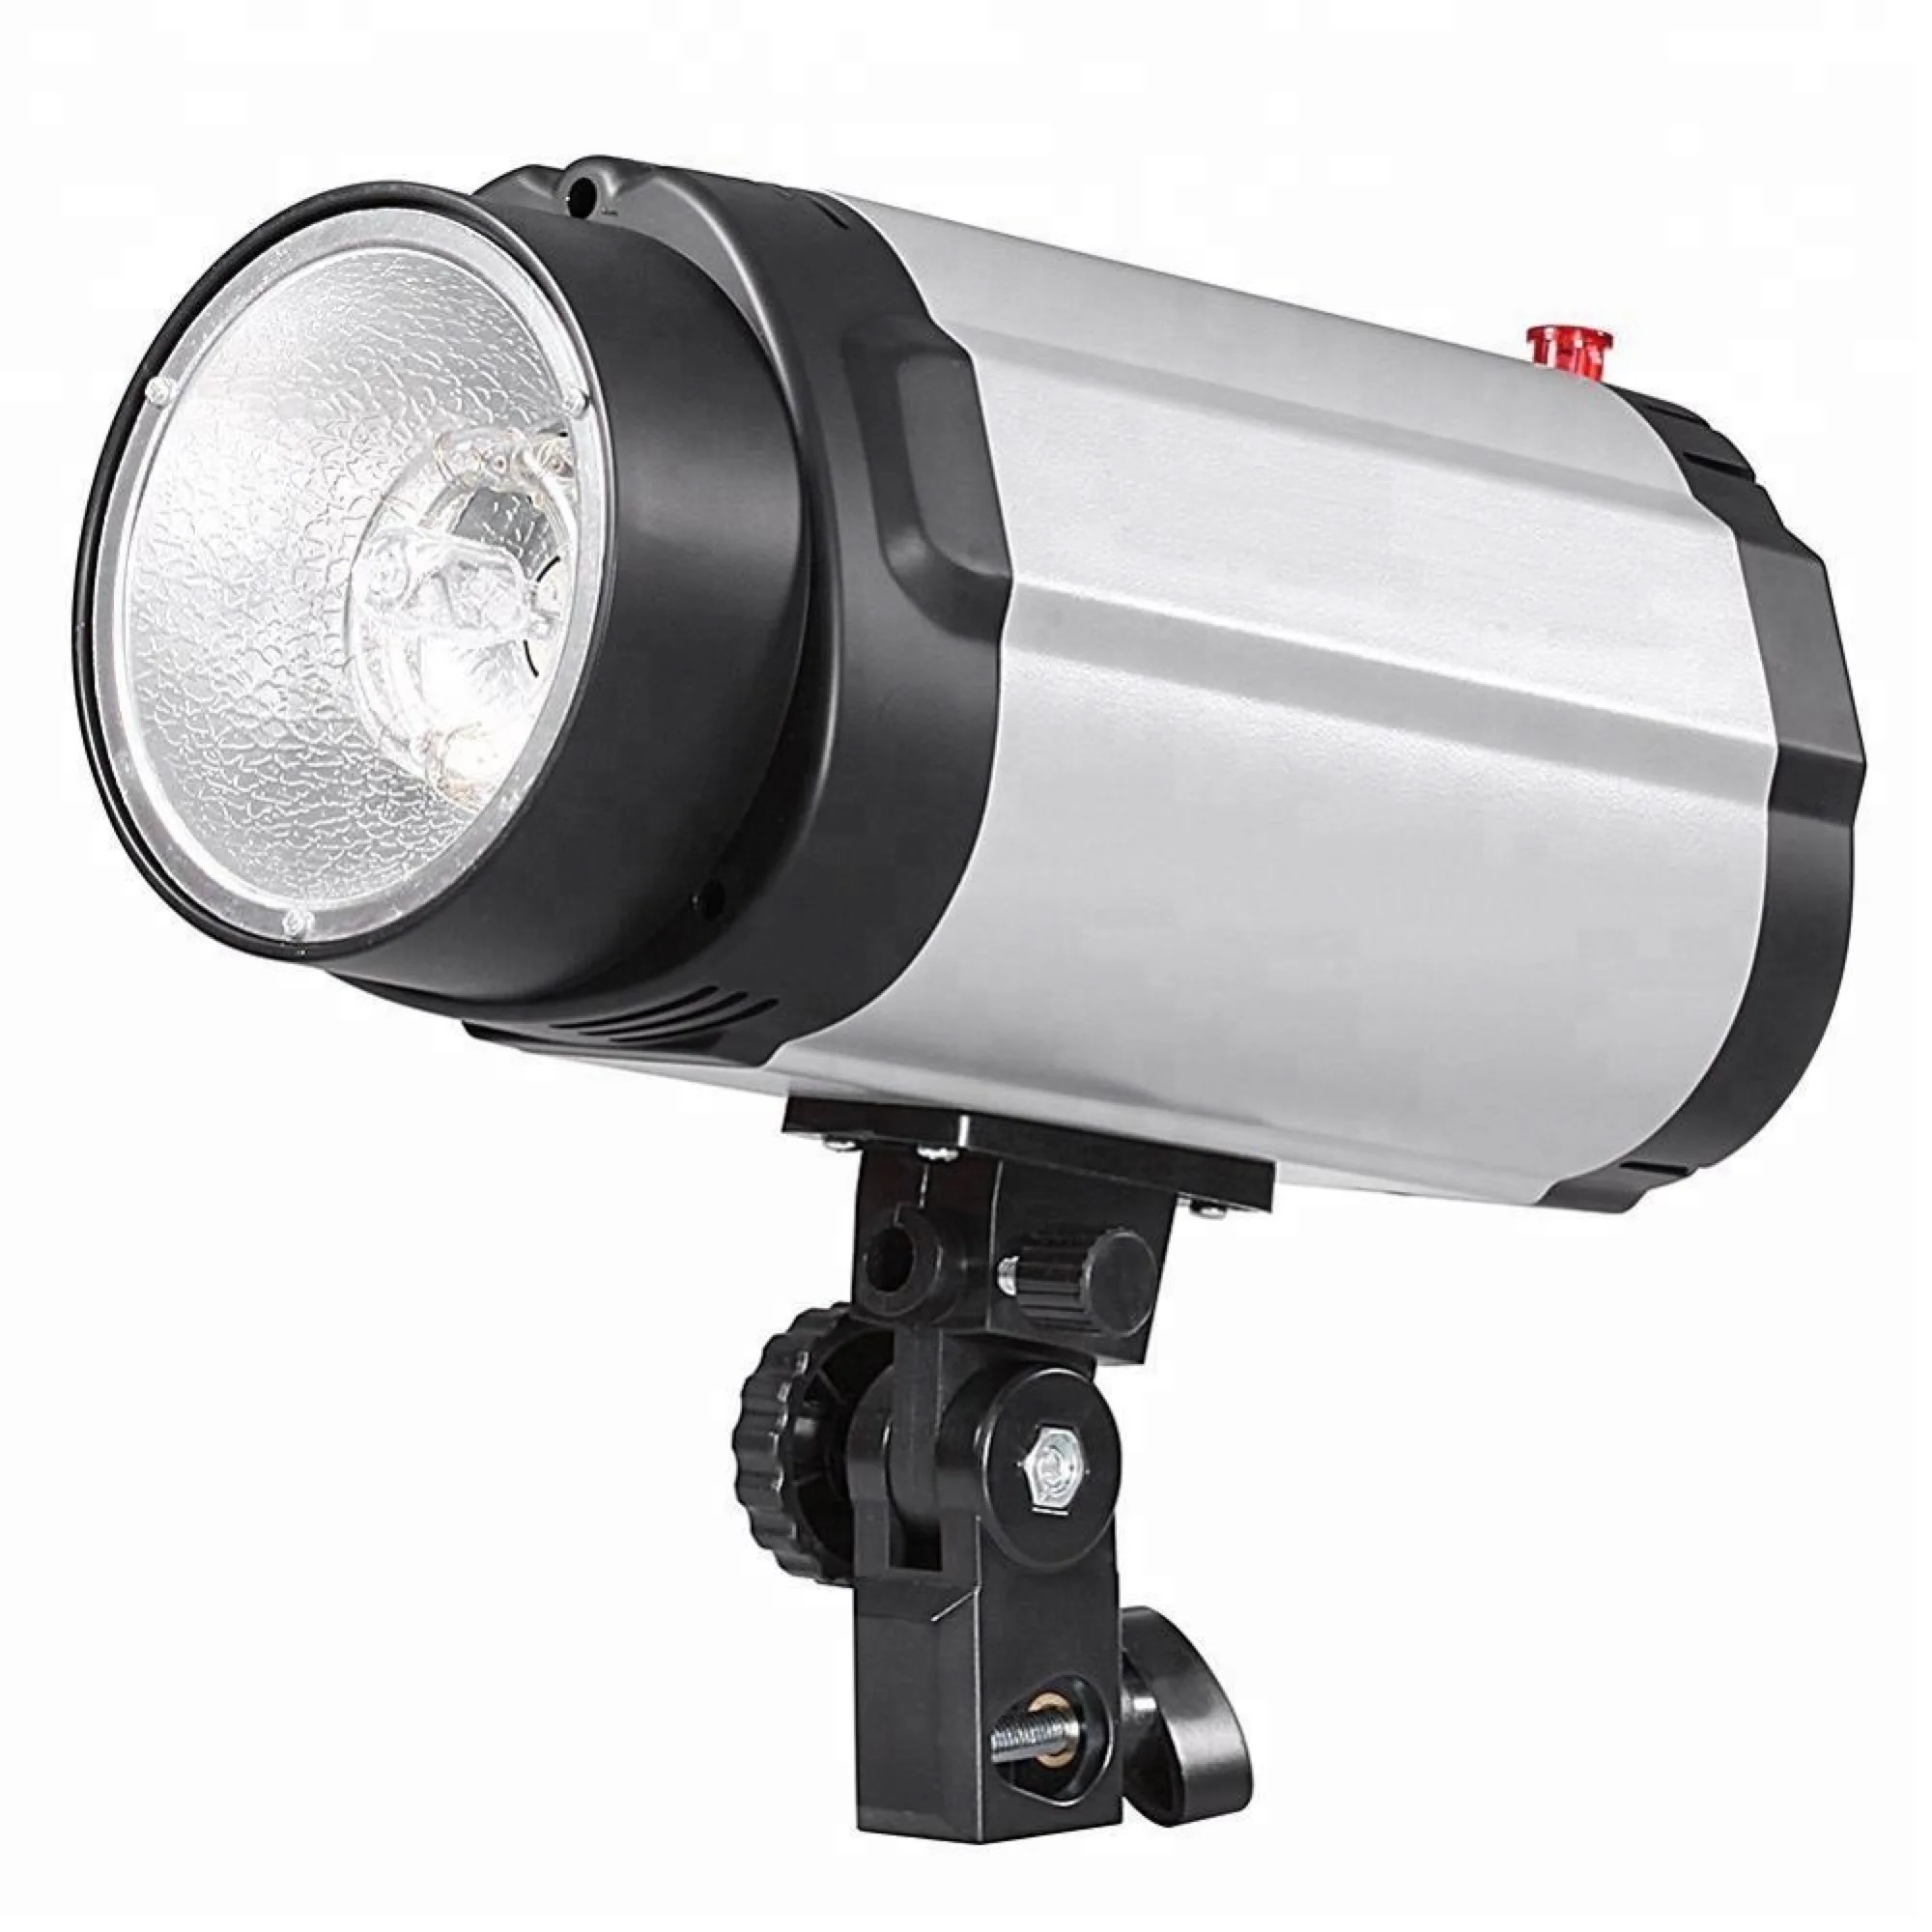 Photography Studio Strobe Photo can be Triggered by Flash Light Infrared Sync 